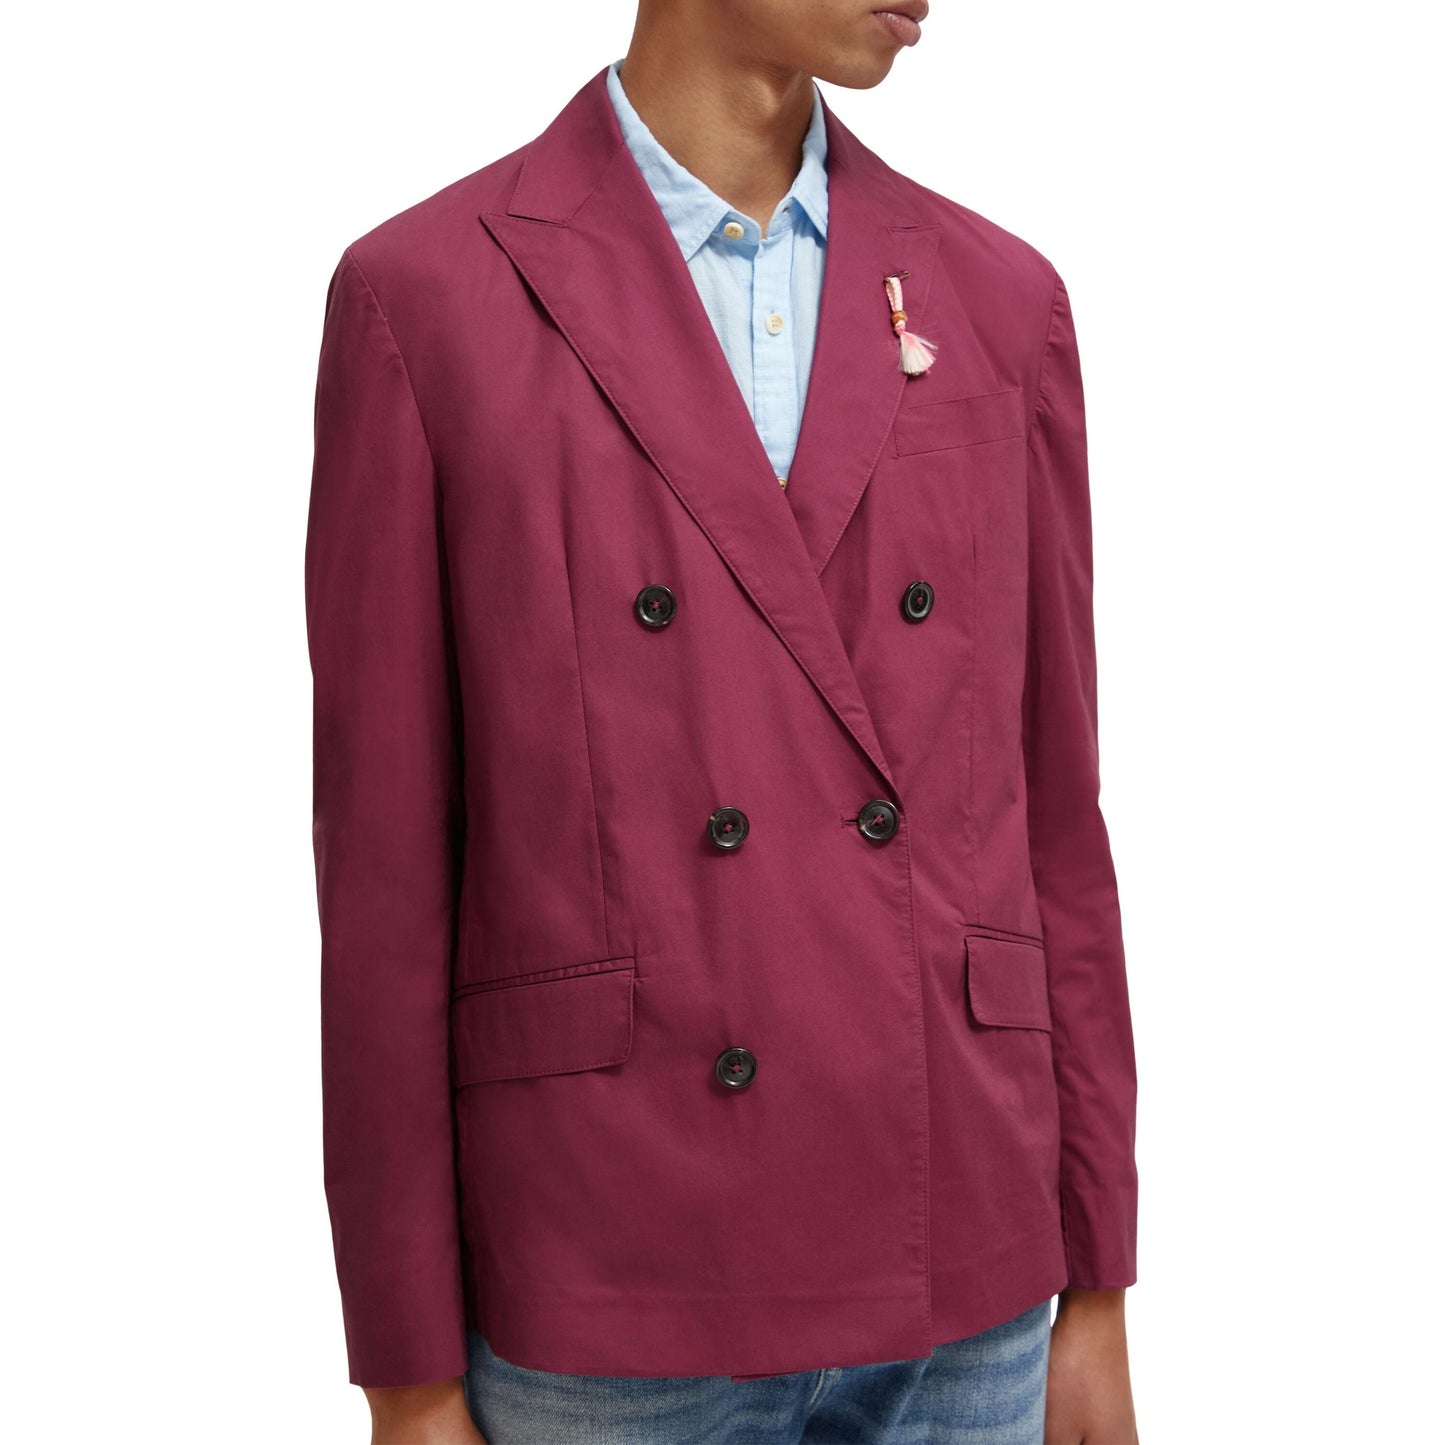 Light Weight Double Breasted Blazer